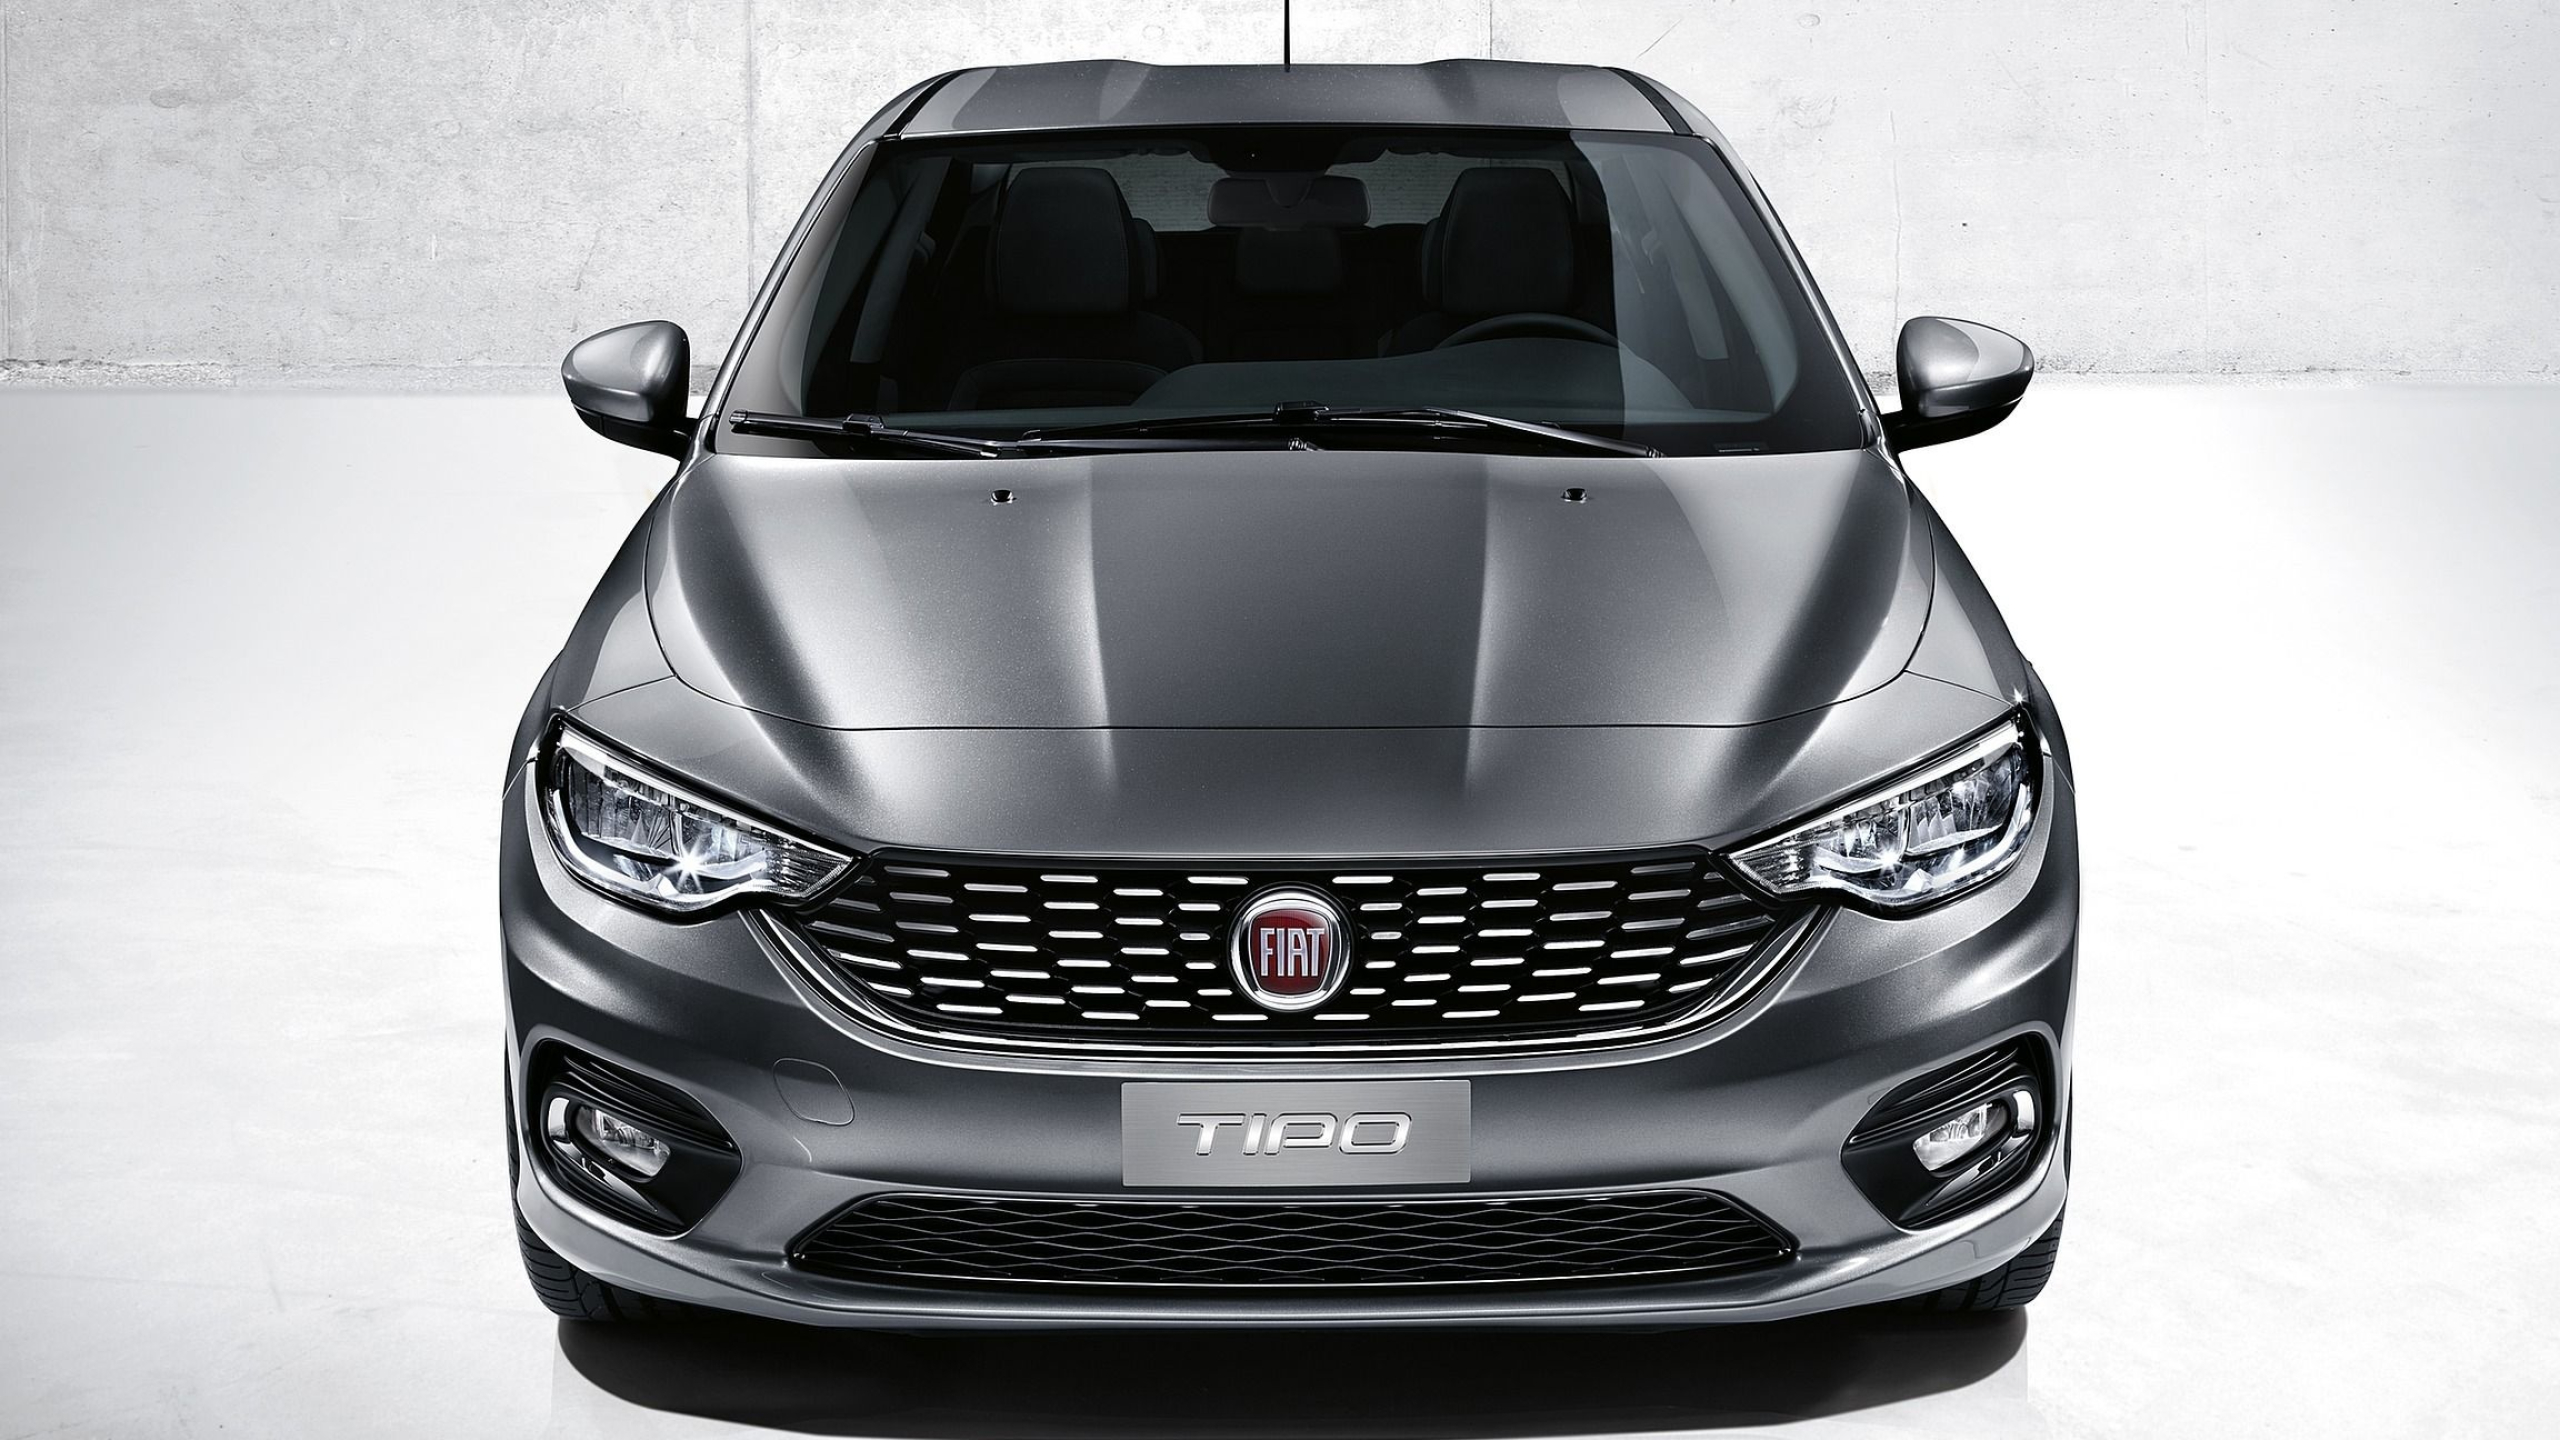 Fiat Tipo, Stunning wallpapers, Dynamic performance, Elegant features, 2560x1440 HD Desktop